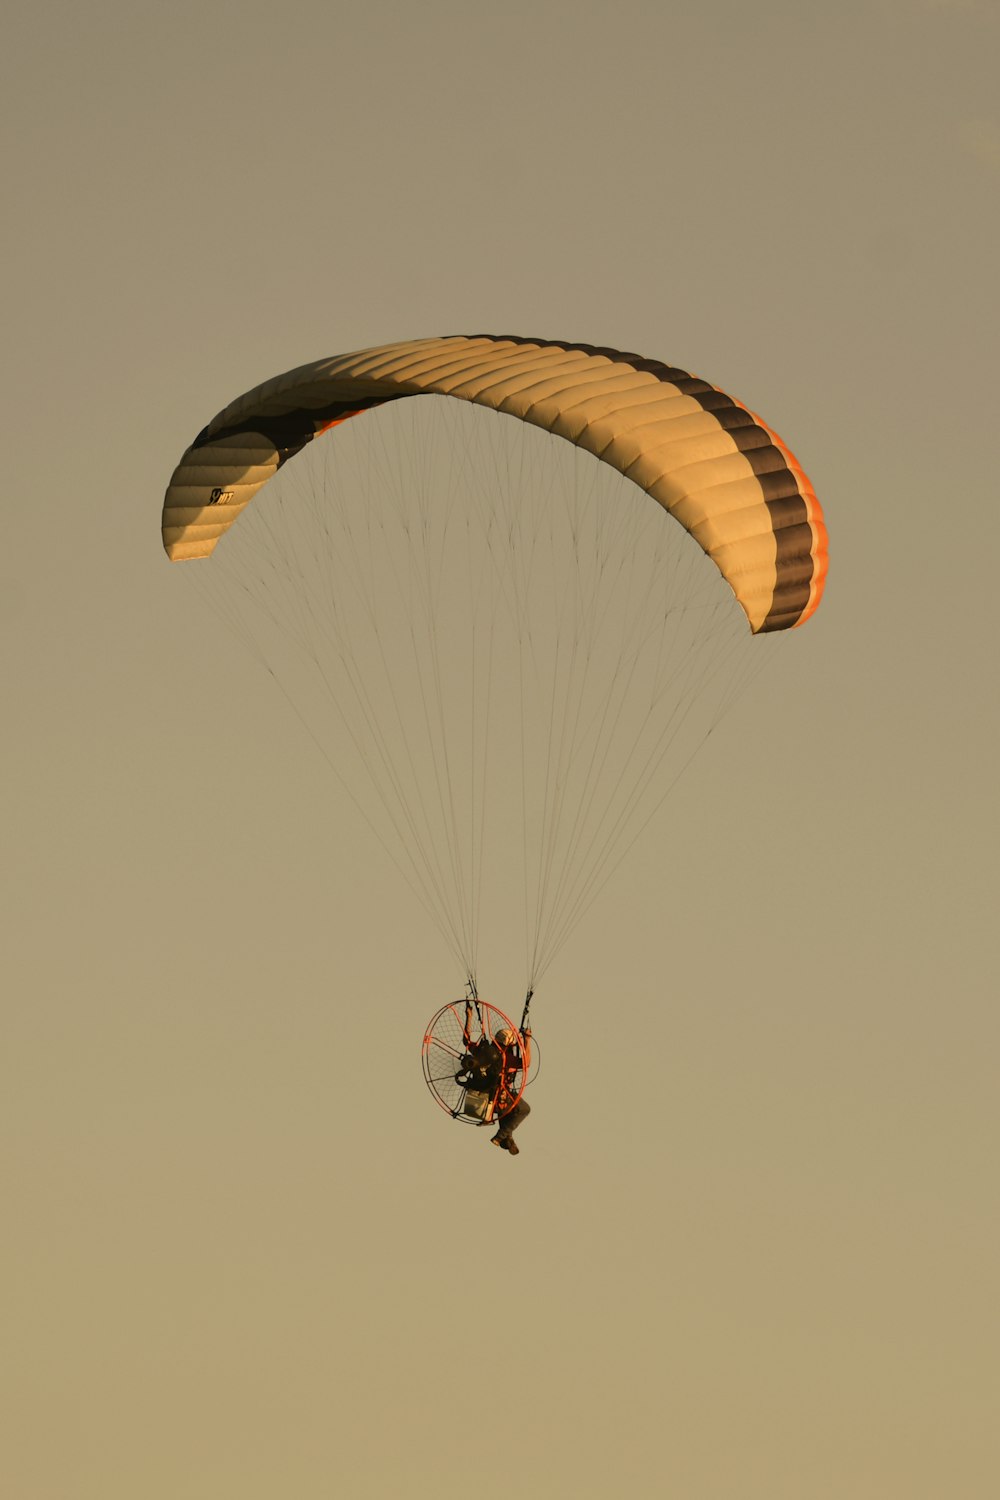 2 person riding on red and yellow parachute